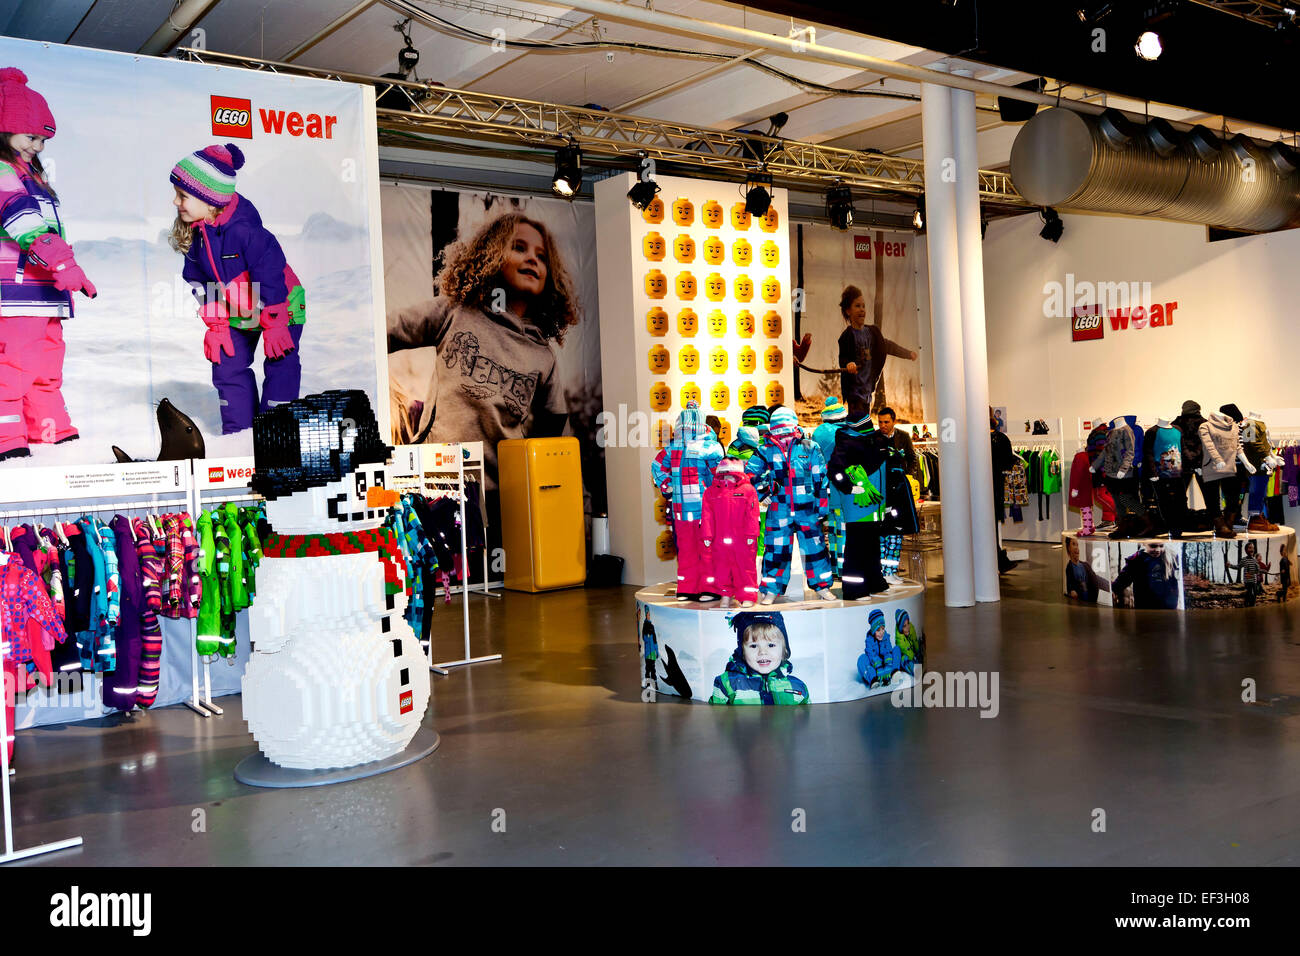 Copenhagen, Denmark. 26th January, 2015. LEGO Wear's stand at Copenhagen  International Fashion Fair for kids (CIFF KIDS) , where they presents their  Meant to Wear collection. A large snowman built with LEGO